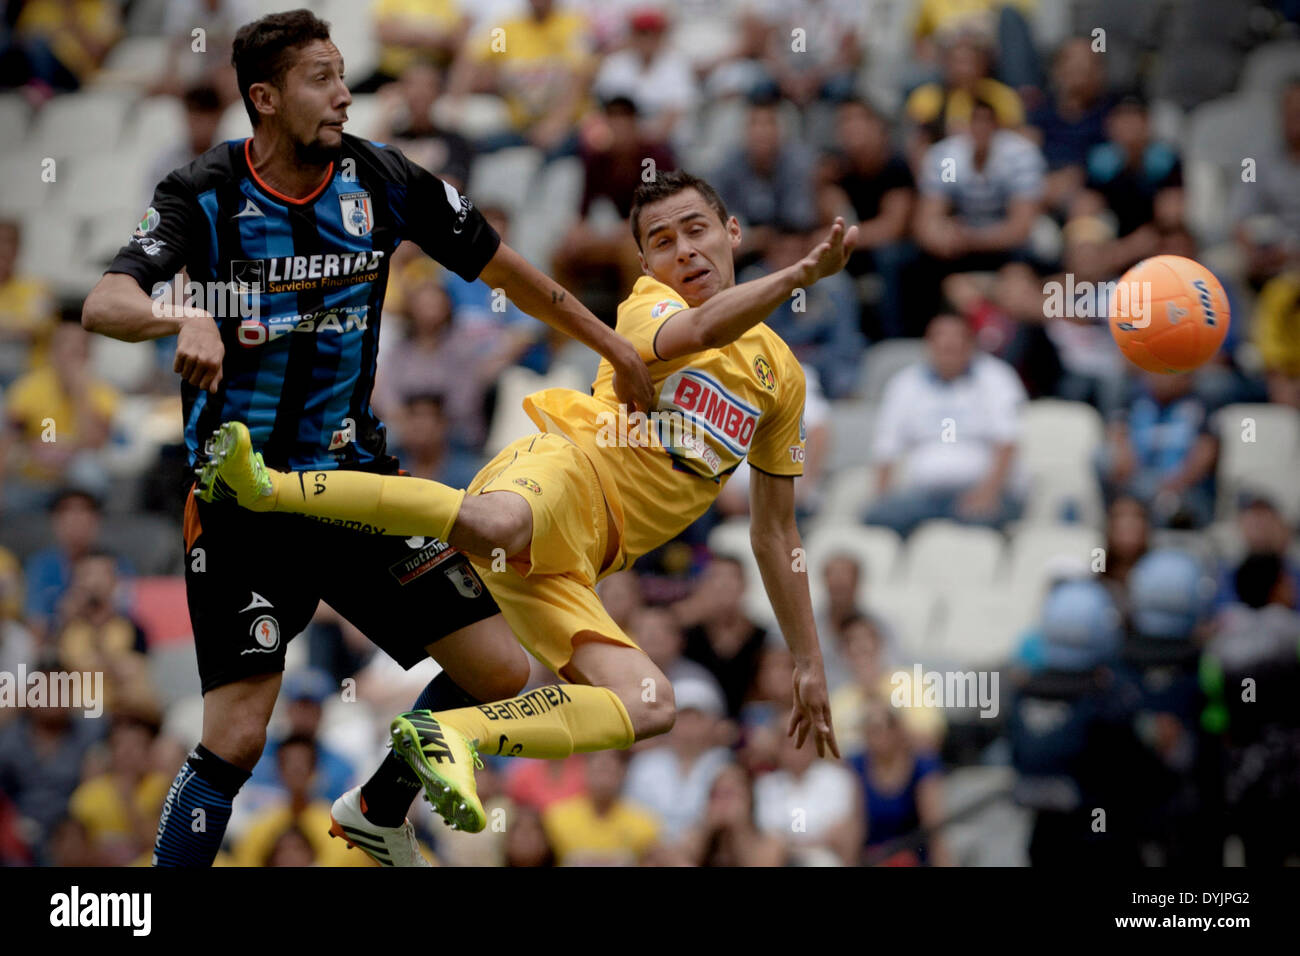 Ciudad De Mexico, Mexico. 19th Apr, 2014. America's Paul Aguilar (R) vies for the ball with Queretaro's Yasser Corona during their match of the MX League Closing Tournament held at Azteca Stadium in Mexico City, capital of Mexico, on April 19, 2014. © Alejandro Ayala/Xinhua/Alamy Live News Stock Photo